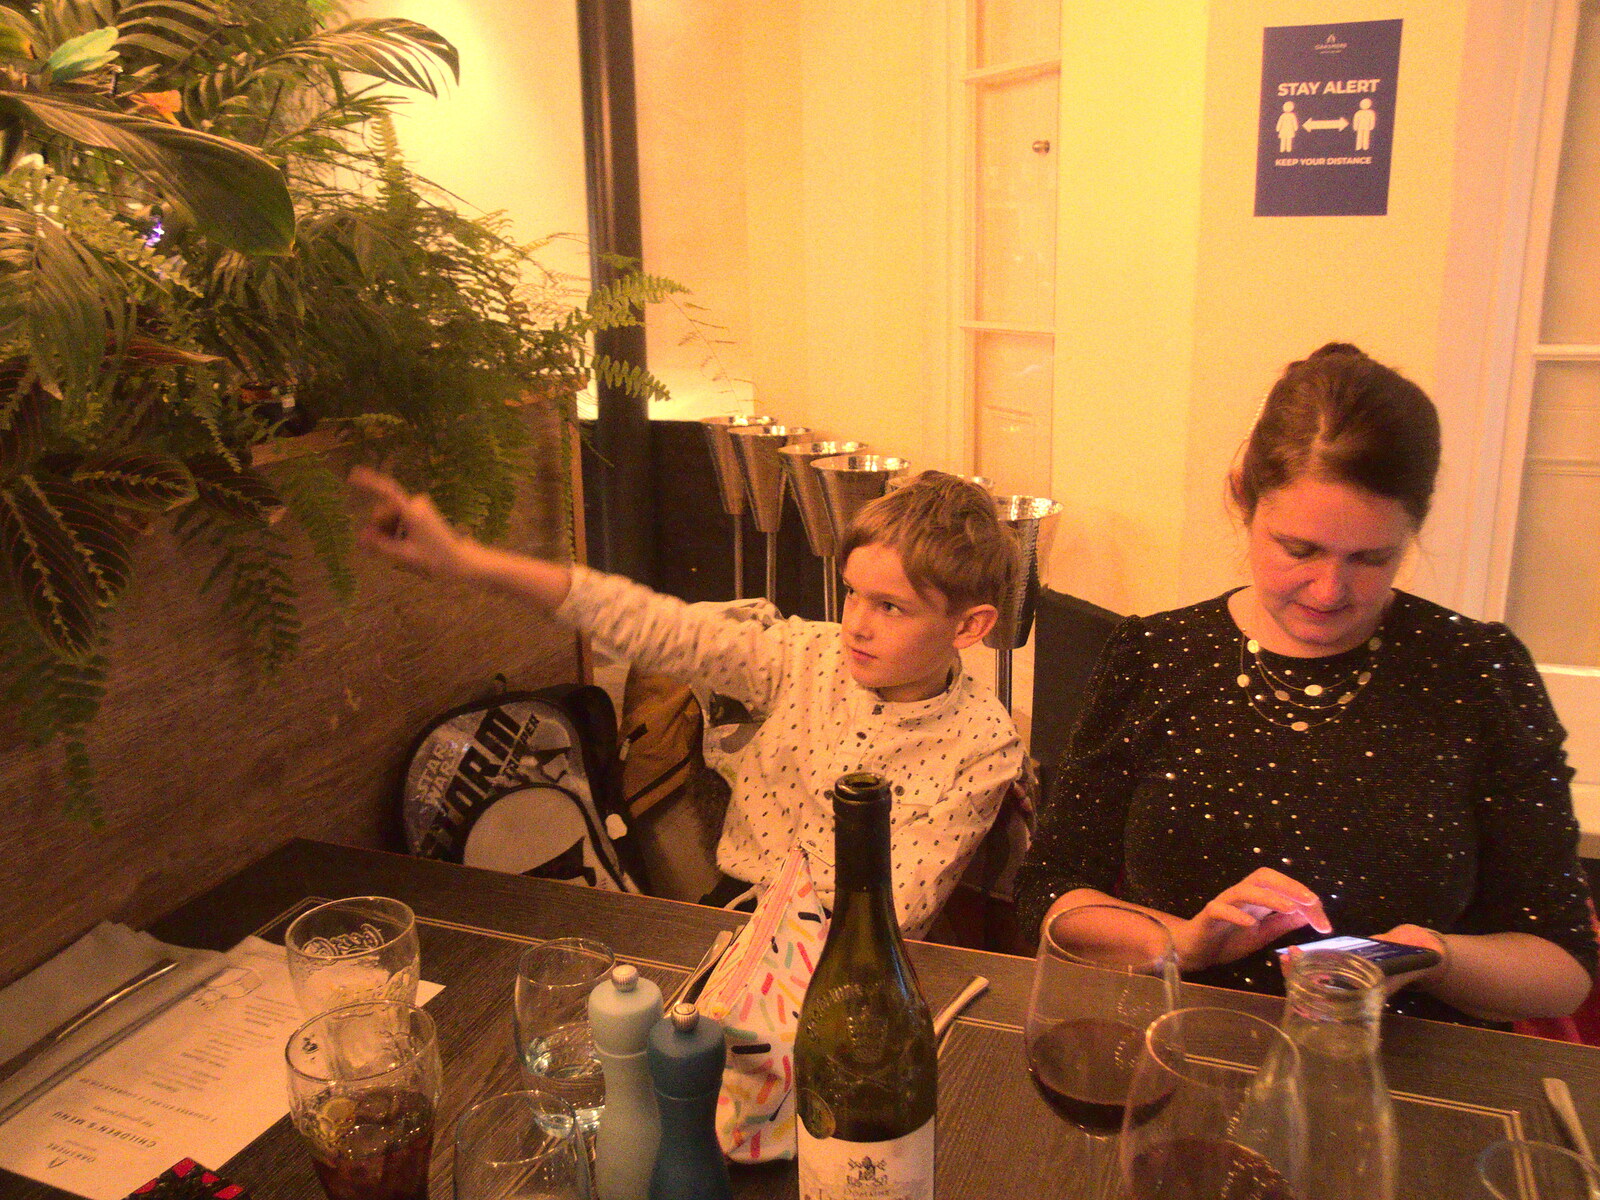 Harry points at something in the fake plants from Dinner at the Oaksmere and a Ride to Eye, Suffolk - 5th January 2022